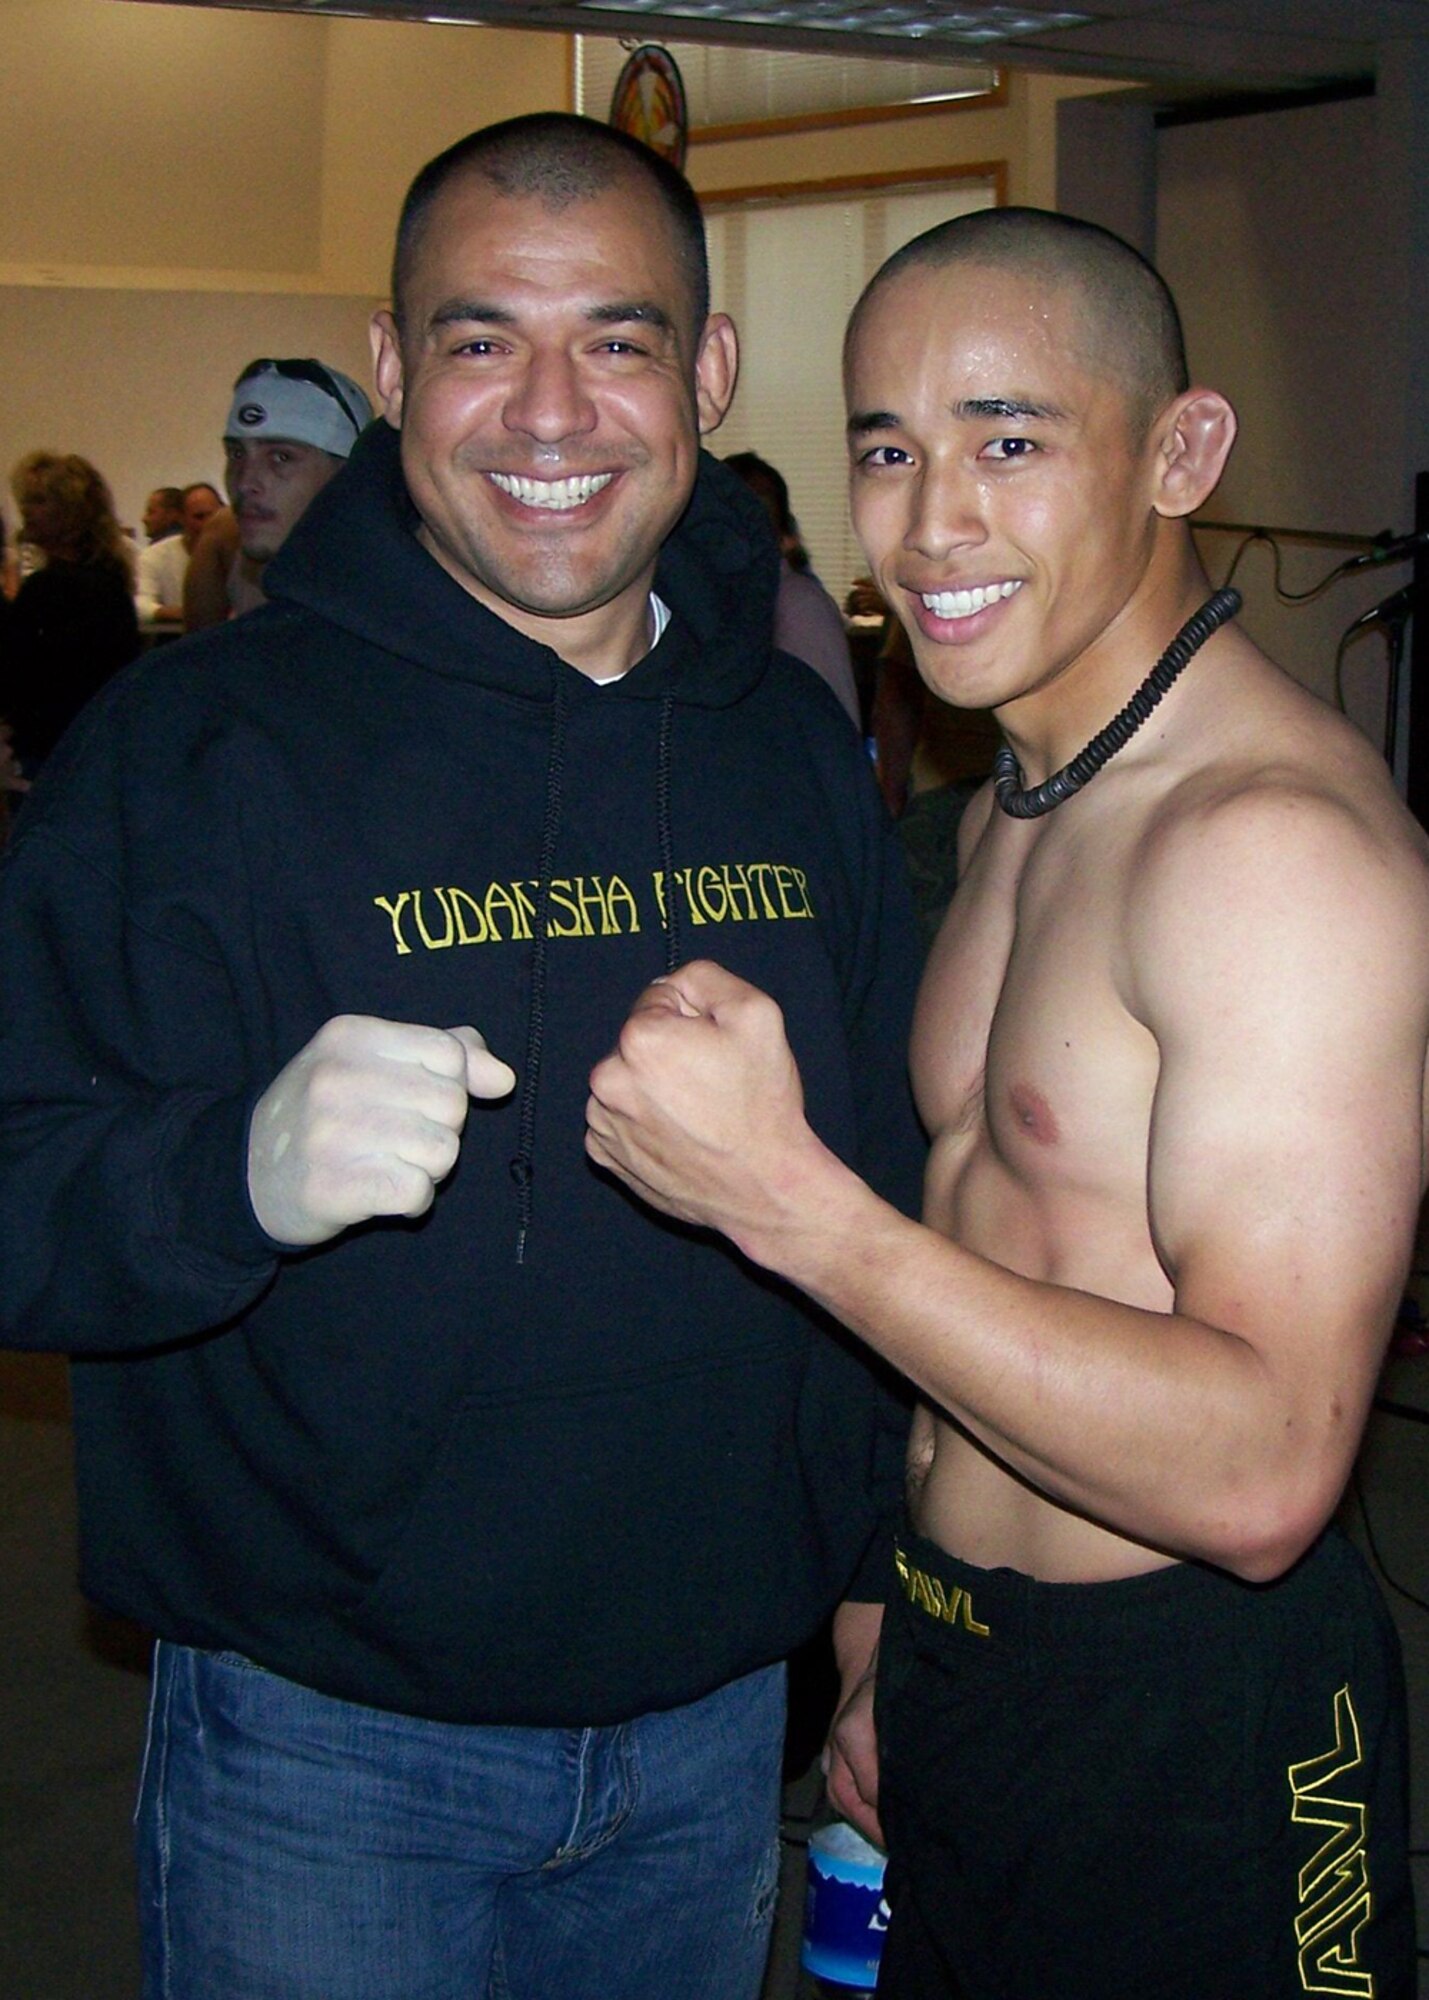 EIELSON AIR FORCE BASE, Alaska--Rico Respicio and instructor Martin Suarez pose for a victory shot after Respicio won his first victory June 22.  Respicio, an Airman with the 354th MXS, defeated his opponent, Justin Thomerson, in only 45 seconds.  (courtesy photo)

